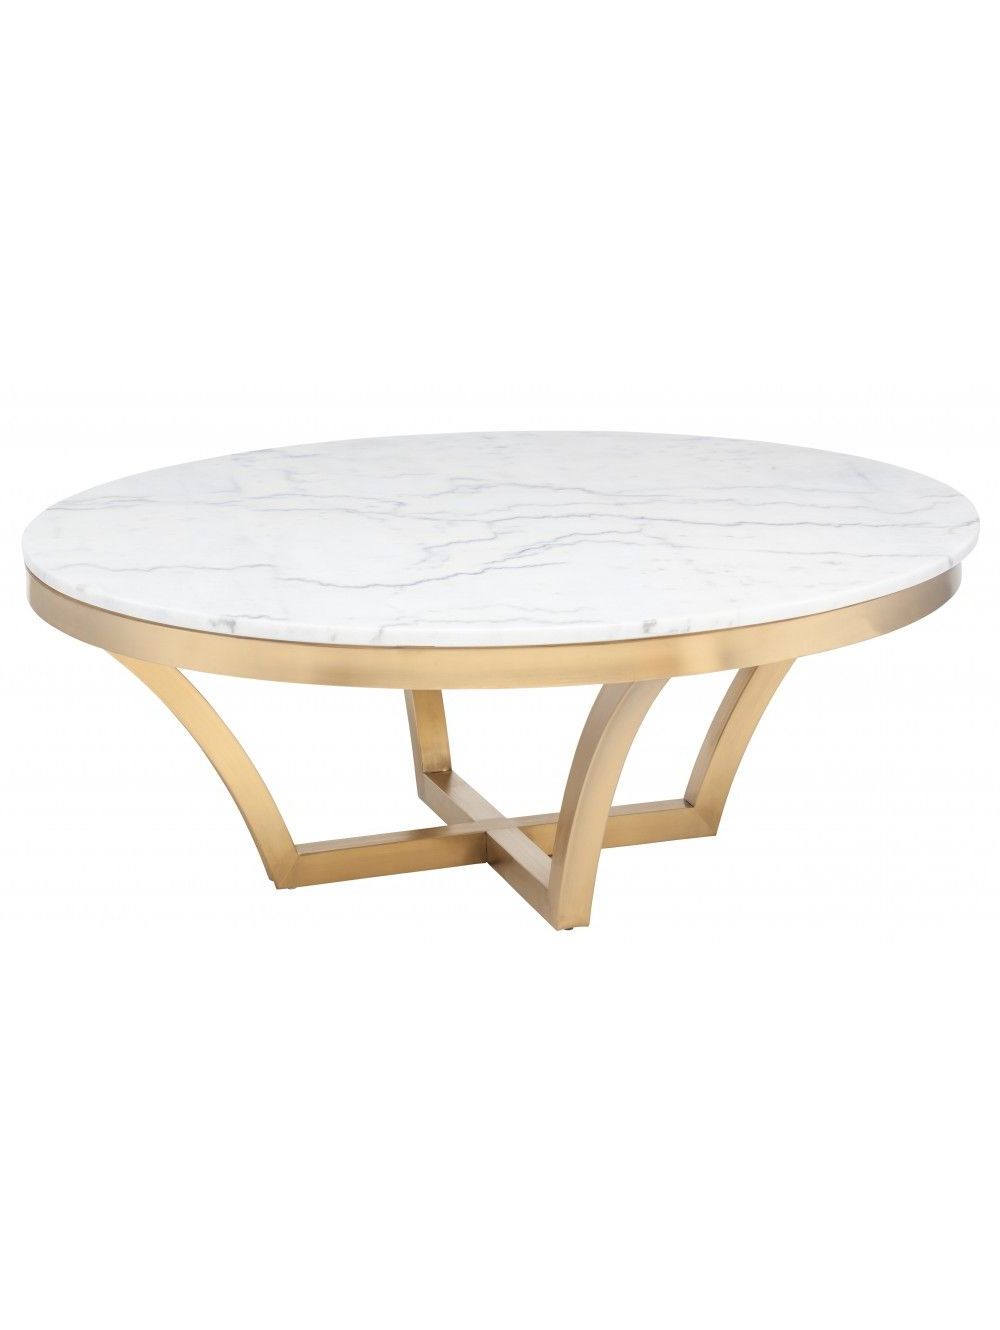 Emmette Coffee Table, White Marble (View 3 of 20)